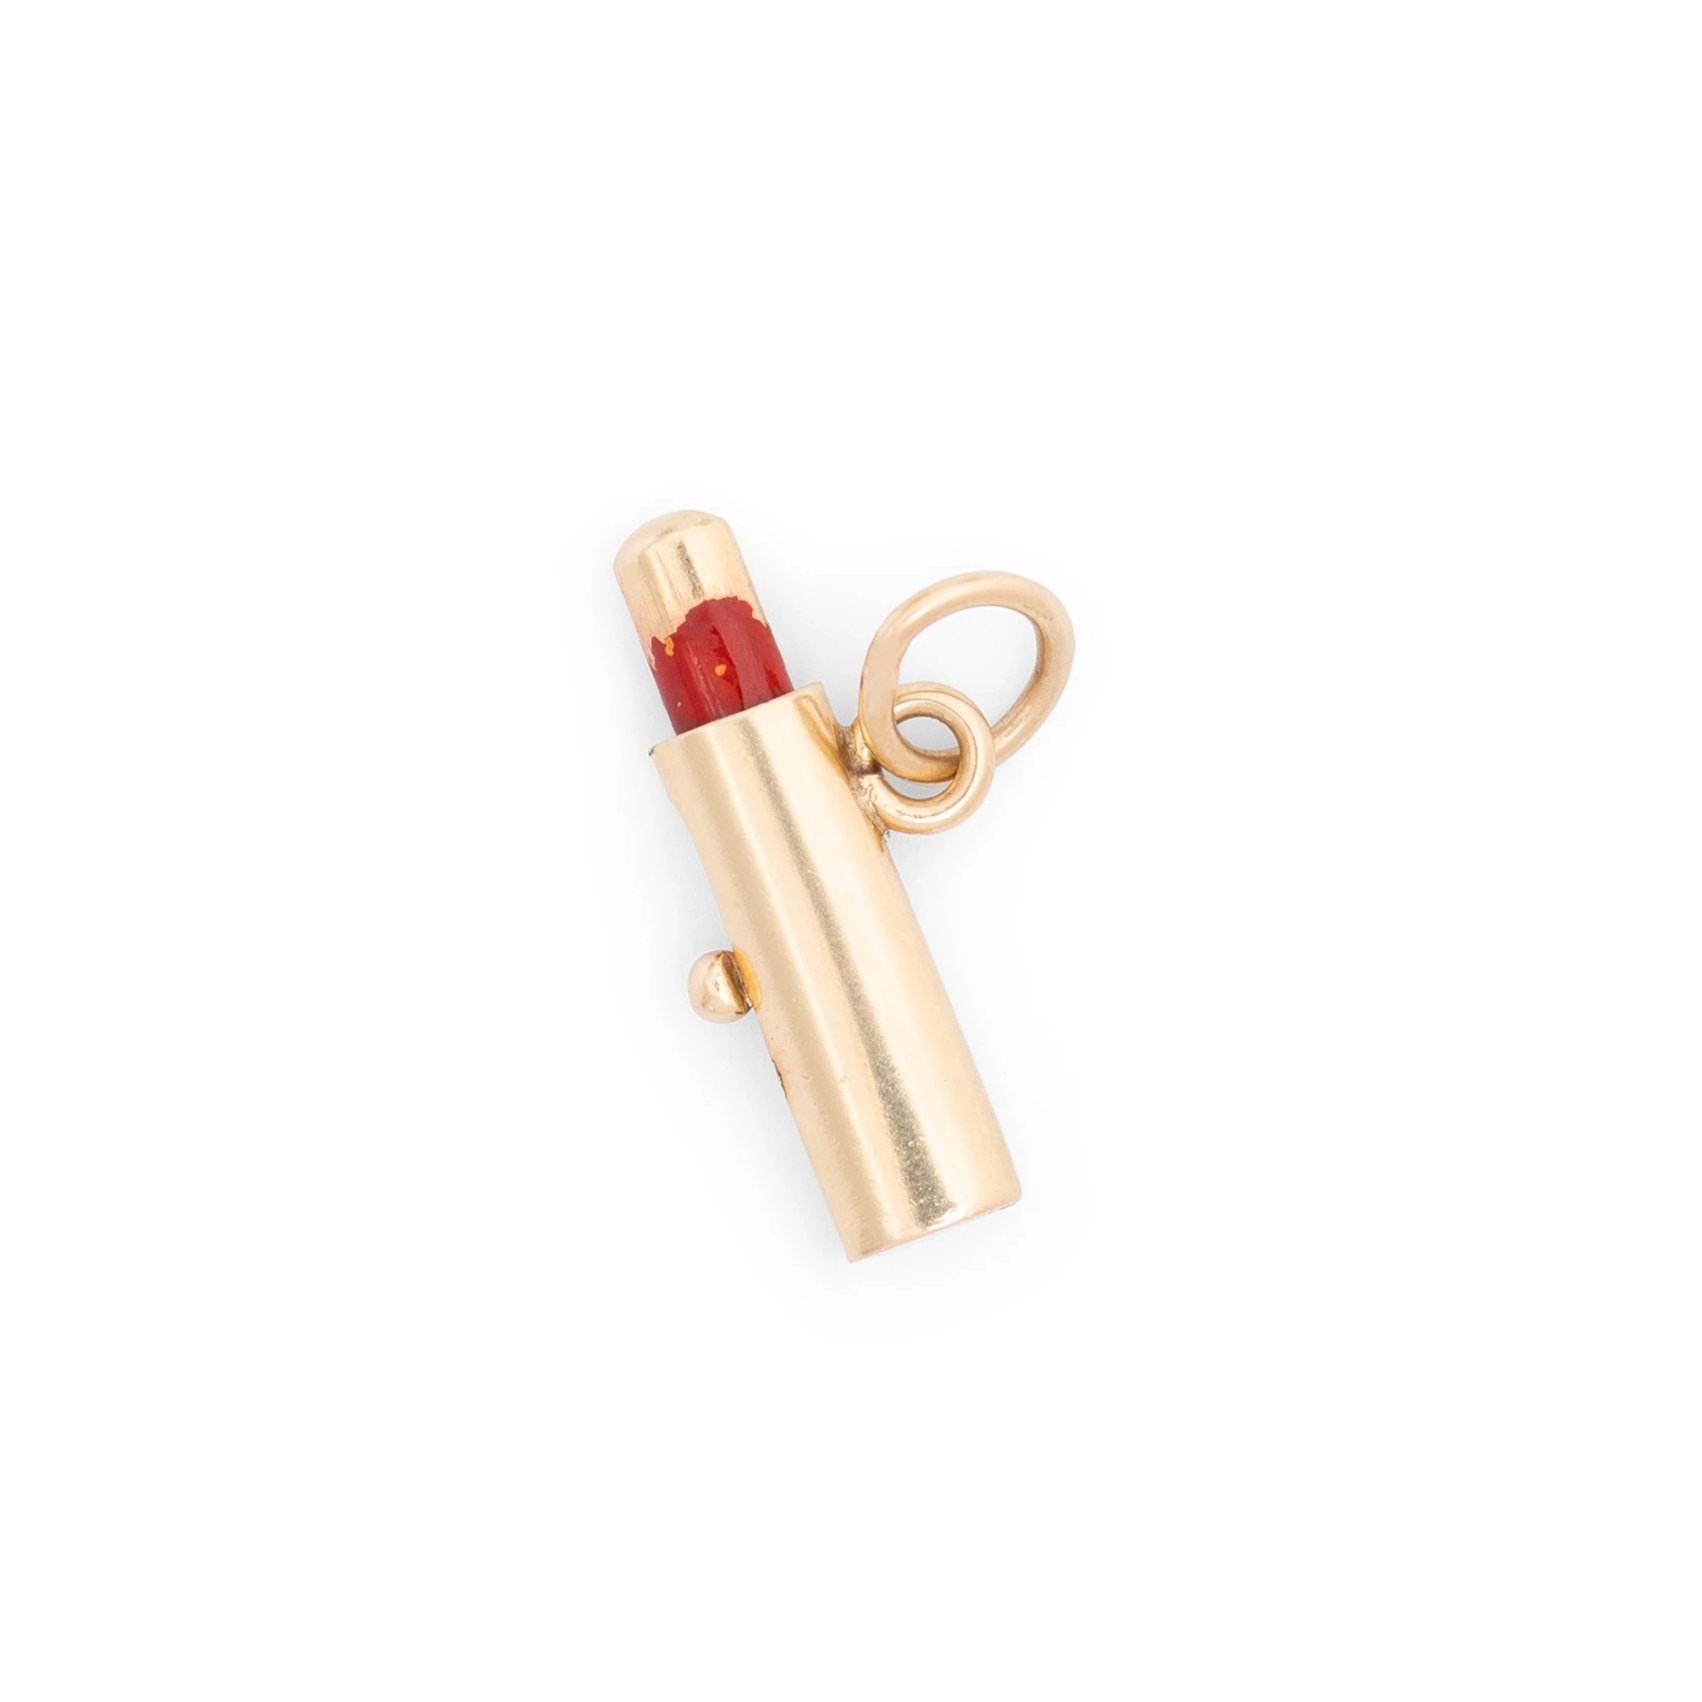 Movable Lipstick 14k Gold and Enamel Charm